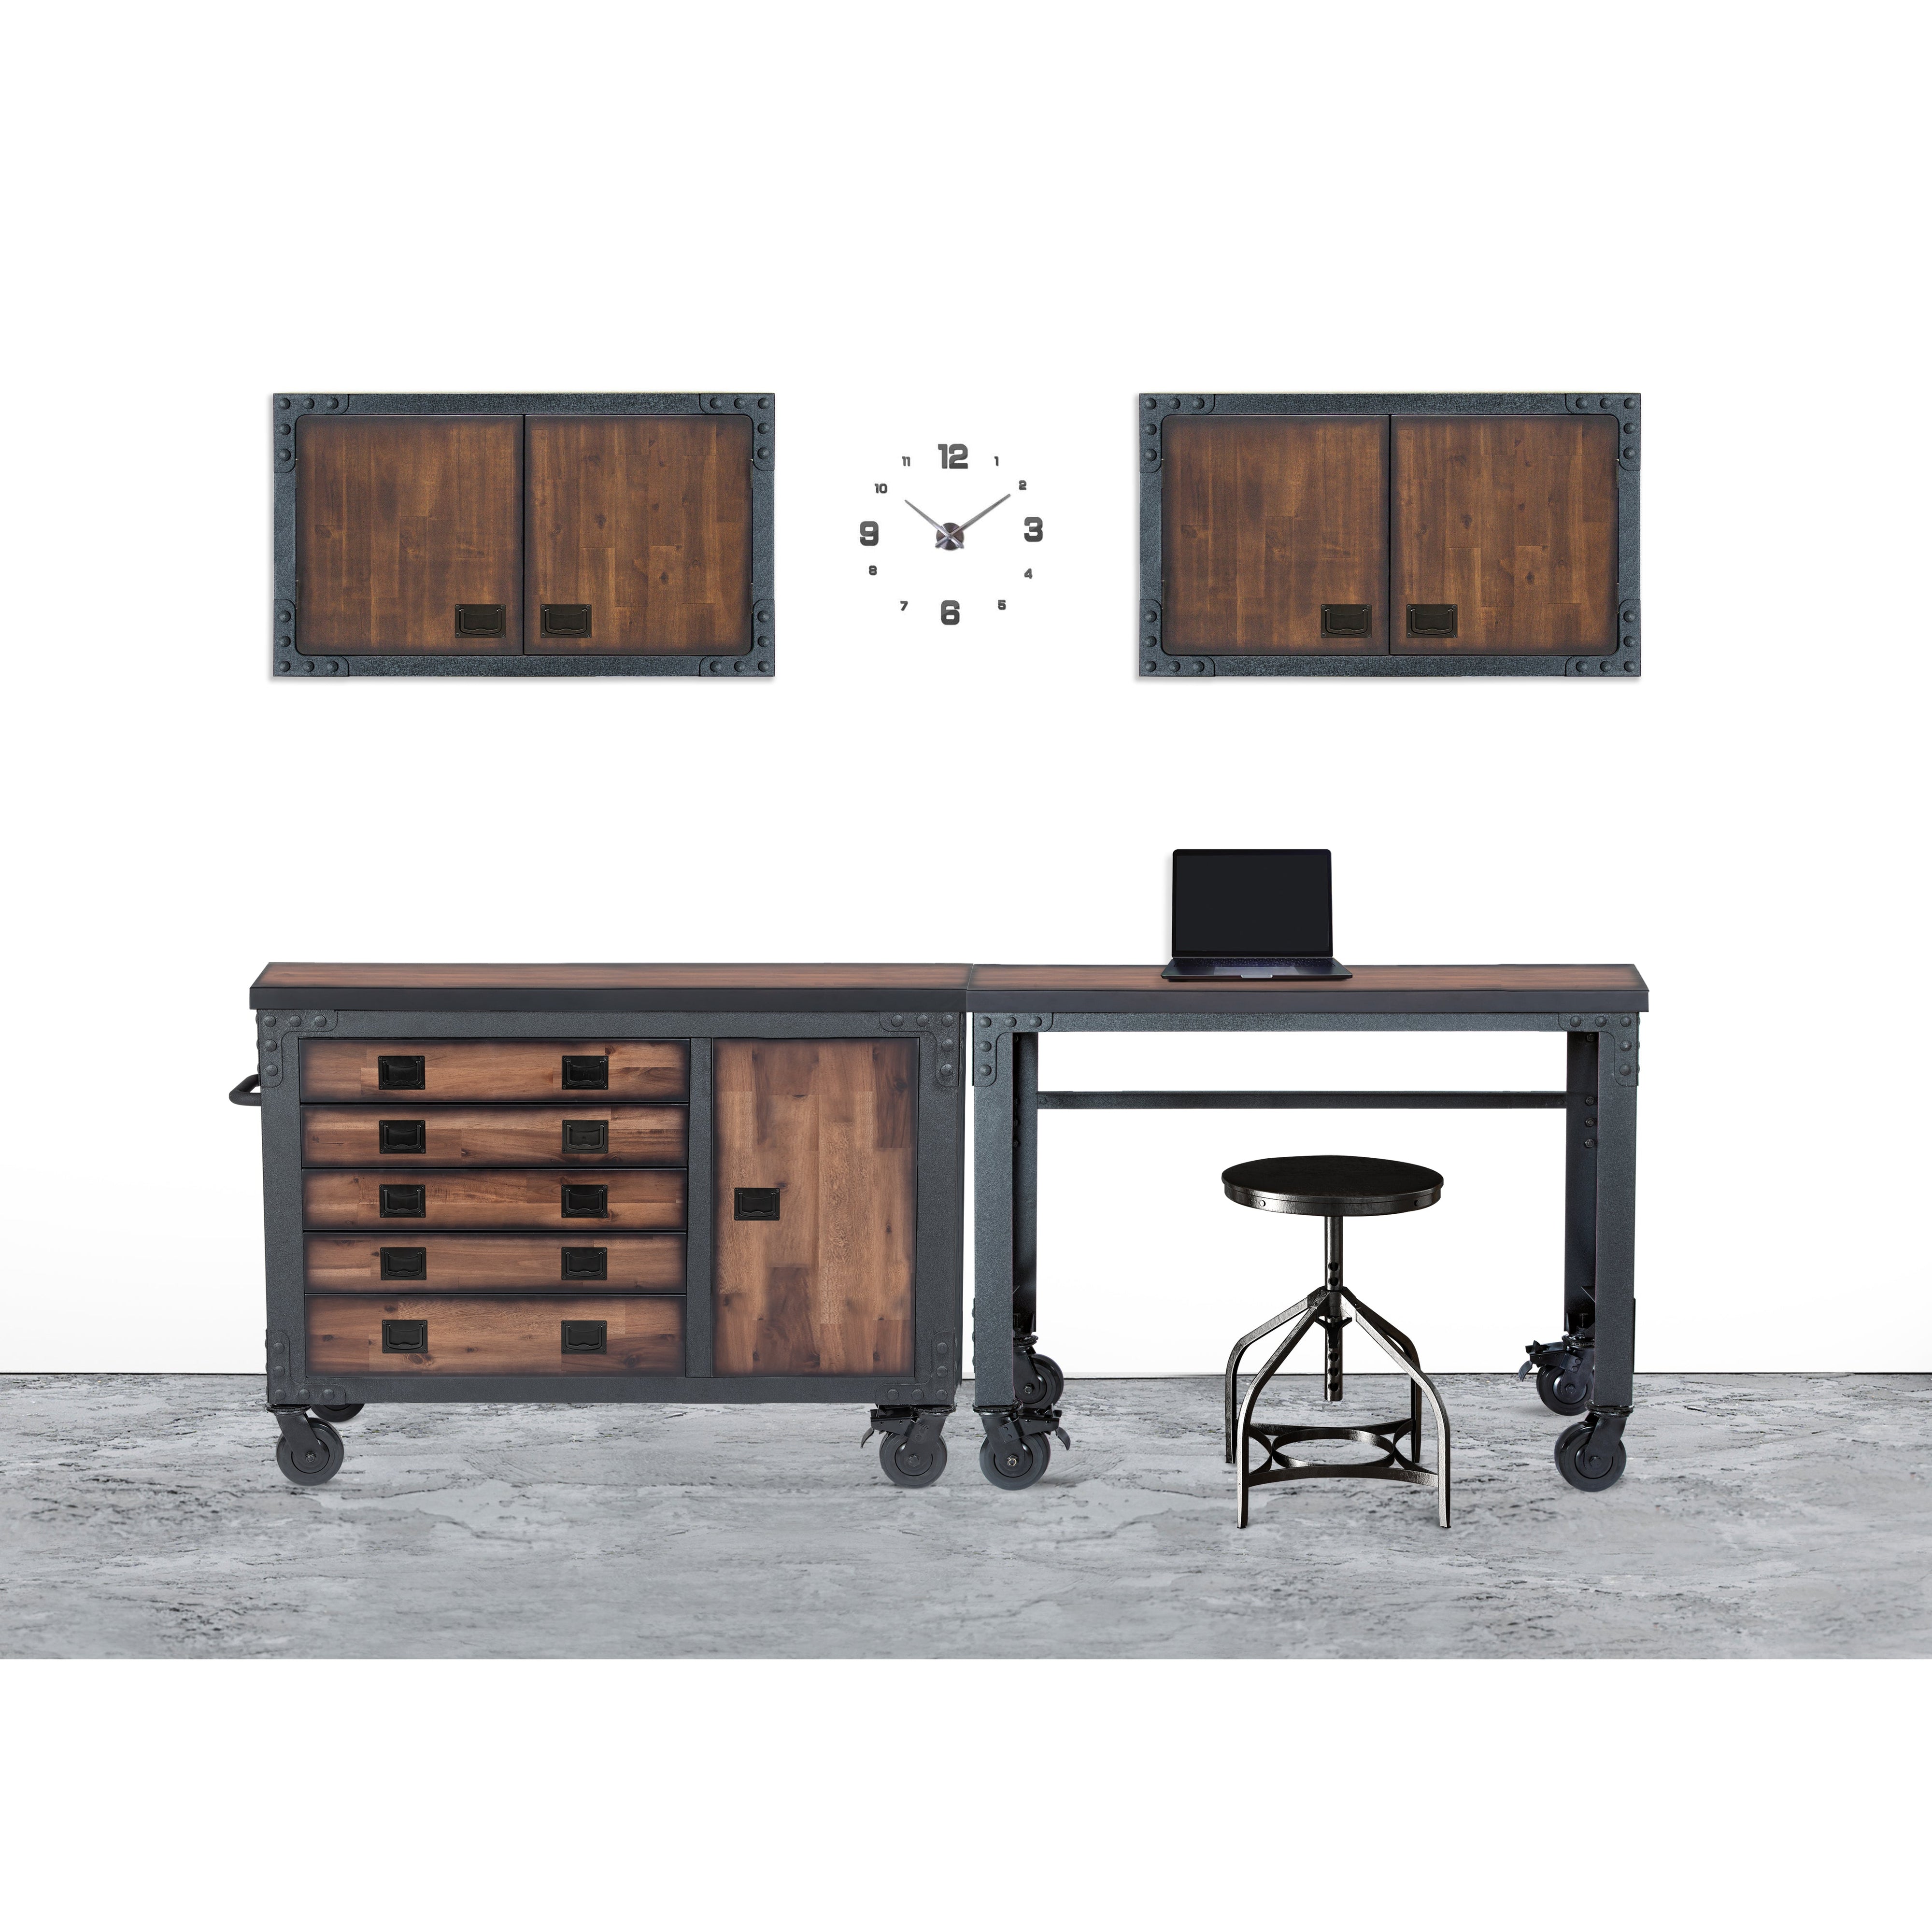 Duramax 11-Piece Garage Storage Combo Set with Workbench, Tool Chests, Wall  Cabinets and Free Standing Cabinets